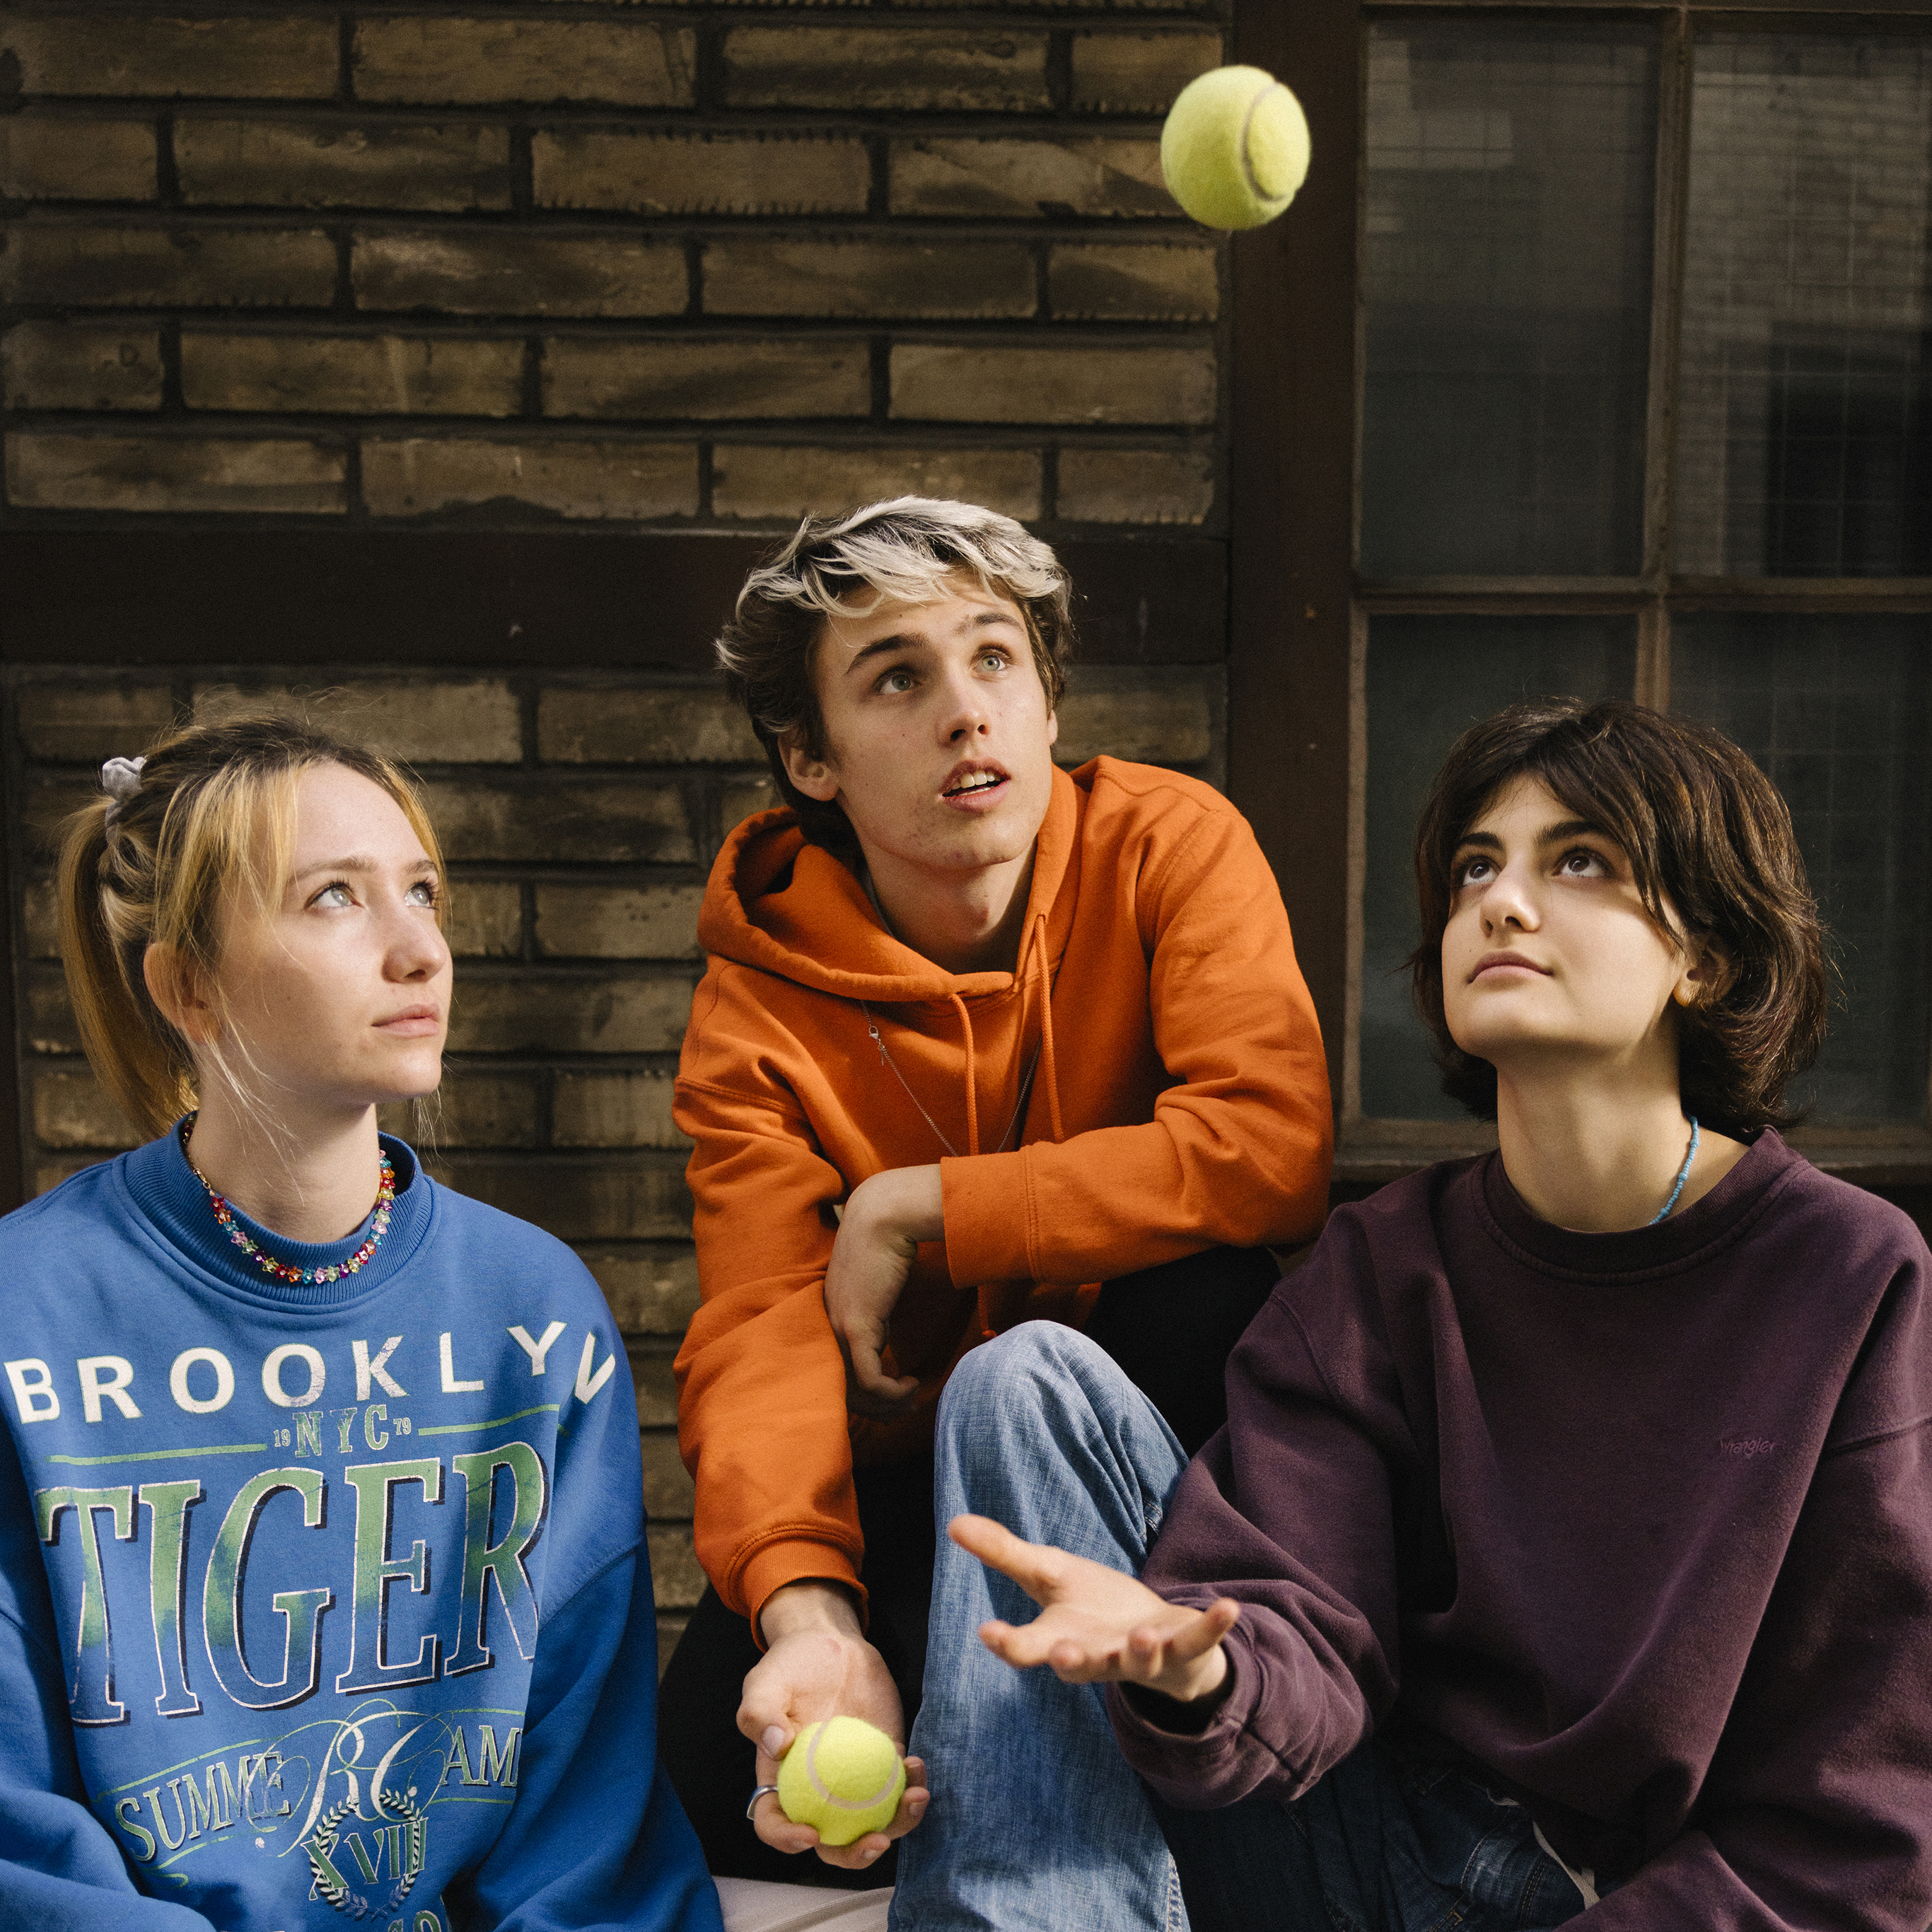 Three teenagers stare focused at a tennis ball thrown into the air.